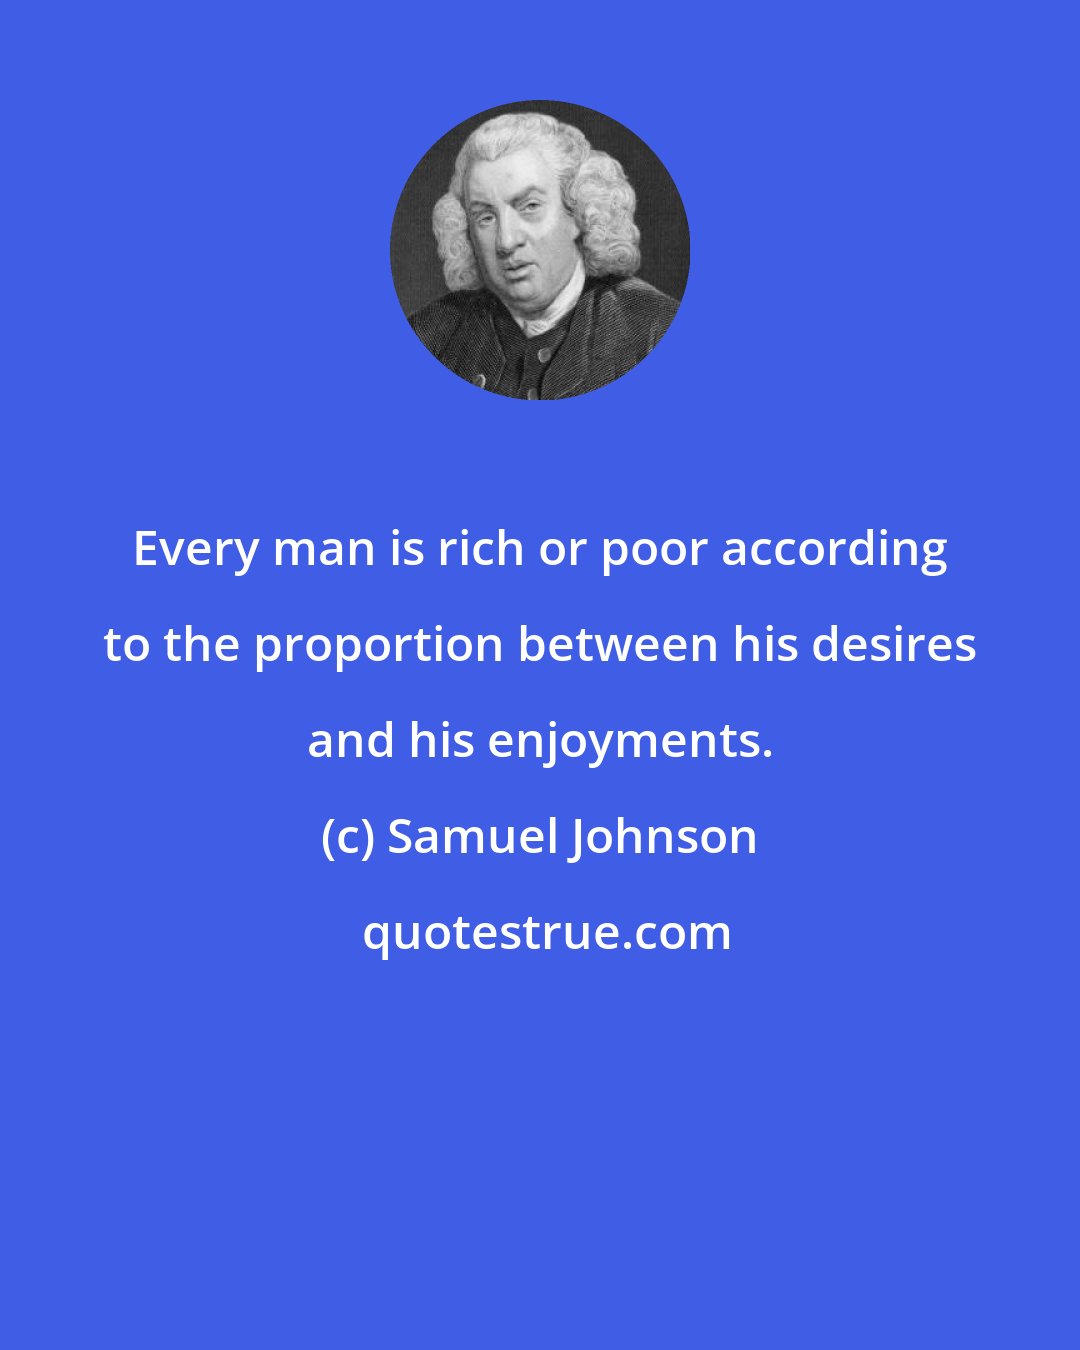 Samuel Johnson: Every man is rich or poor according to the proportion between his desires and his enjoyments.